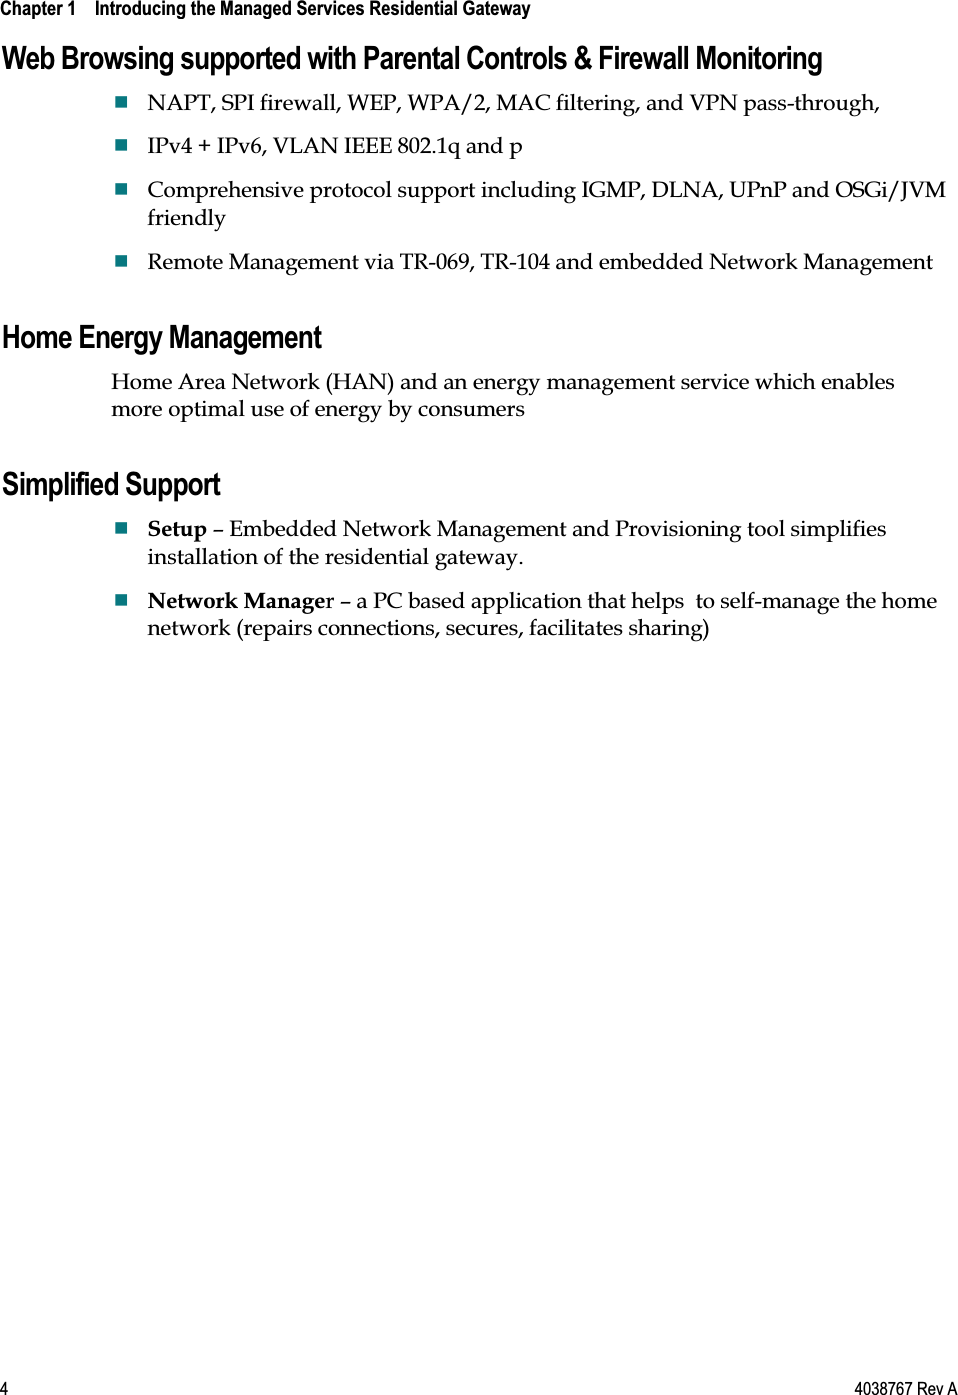  Chapter 1    Introducing the Managed Services Residential Gateway    4  4038767 Rev A Web Browsing supported with Parental Controls &amp; Firewall Monitoring  NAPT, SPI firewall, WEP, WPA/2, MAC filtering, and VPN pass-through,   IPv4 + IPv6, VLAN IEEE 802.1q and p  Comprehensive protocol support including IGMP, DLNA, UPnP and OSGi/JVM friendly  Remote Management via TR-069, TR-104 and embedded Network Management  Home Energy Management Home Area Network (HAN) and an energy management service which enables more optimal use of energy by consumers  Simplified Support  Setup – Embedded Network Management and Provisioning tool simplifies installation of the residential gateway.  Network Manager – a PC based application that helps  to self-manage the home network (repairs connections, secures, facilitates sharing)  